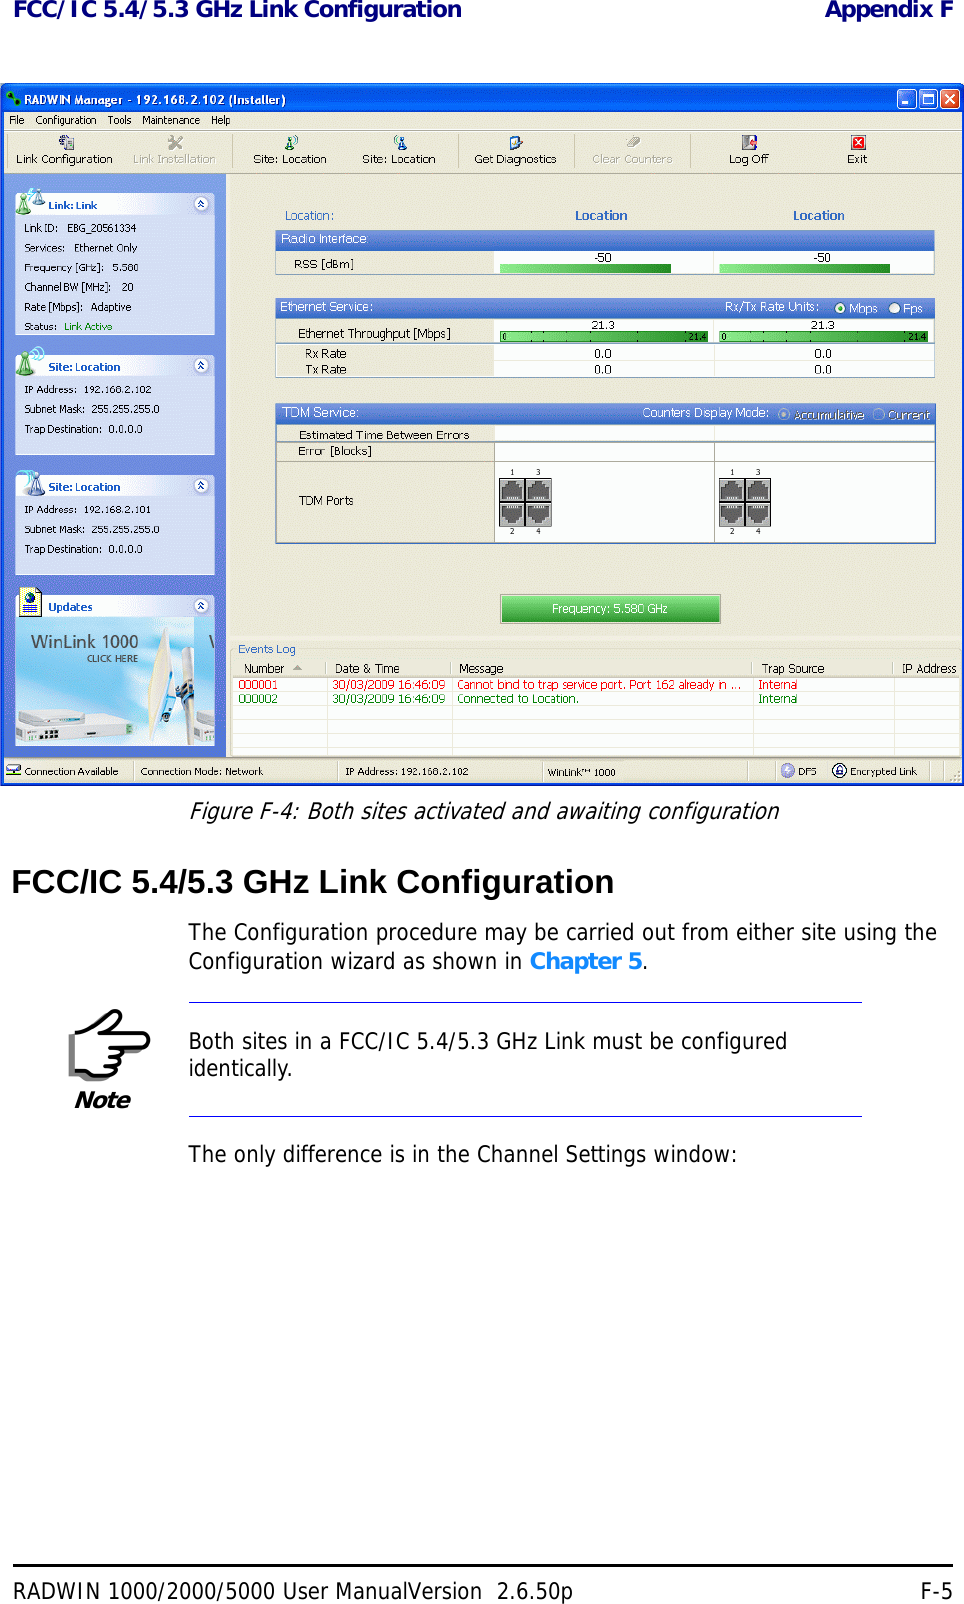 FCC/IC 5.4/5.3 GHz Link Configuration Appendix FRADWIN 1000/2000/5000 User ManualVersion  2.6.50p F-5Figure F-4: Both sites activated and awaiting configurationFCC/IC 5.4/5.3 GHz Link ConfigurationThe Configuration procedure may be carried out from either site using the Configuration wizard as shown in Chapter 5. The only difference is in the Channel Settings window:NoteBoth sites in a FCC/IC 5.4/5.3 GHz Link must be configured identically.